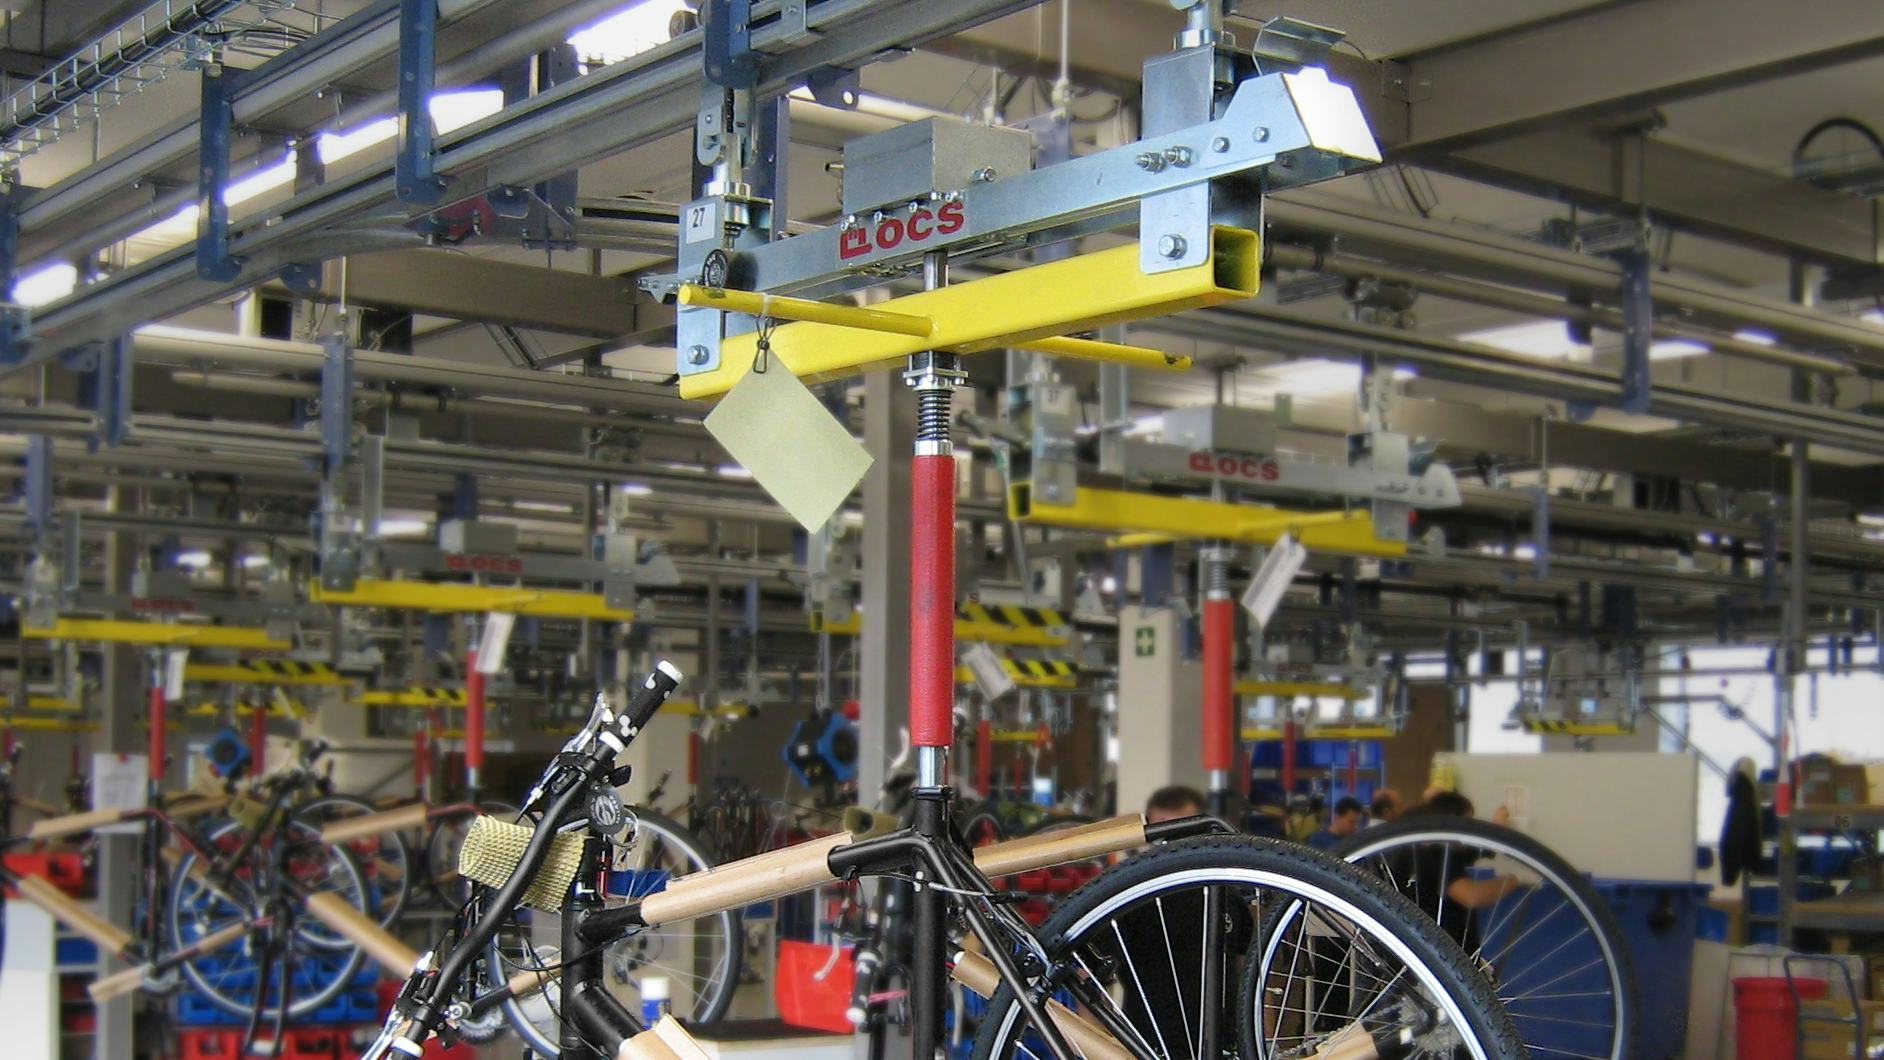 Doubling the production capacity of cargo bikes with a custom-made assembly line